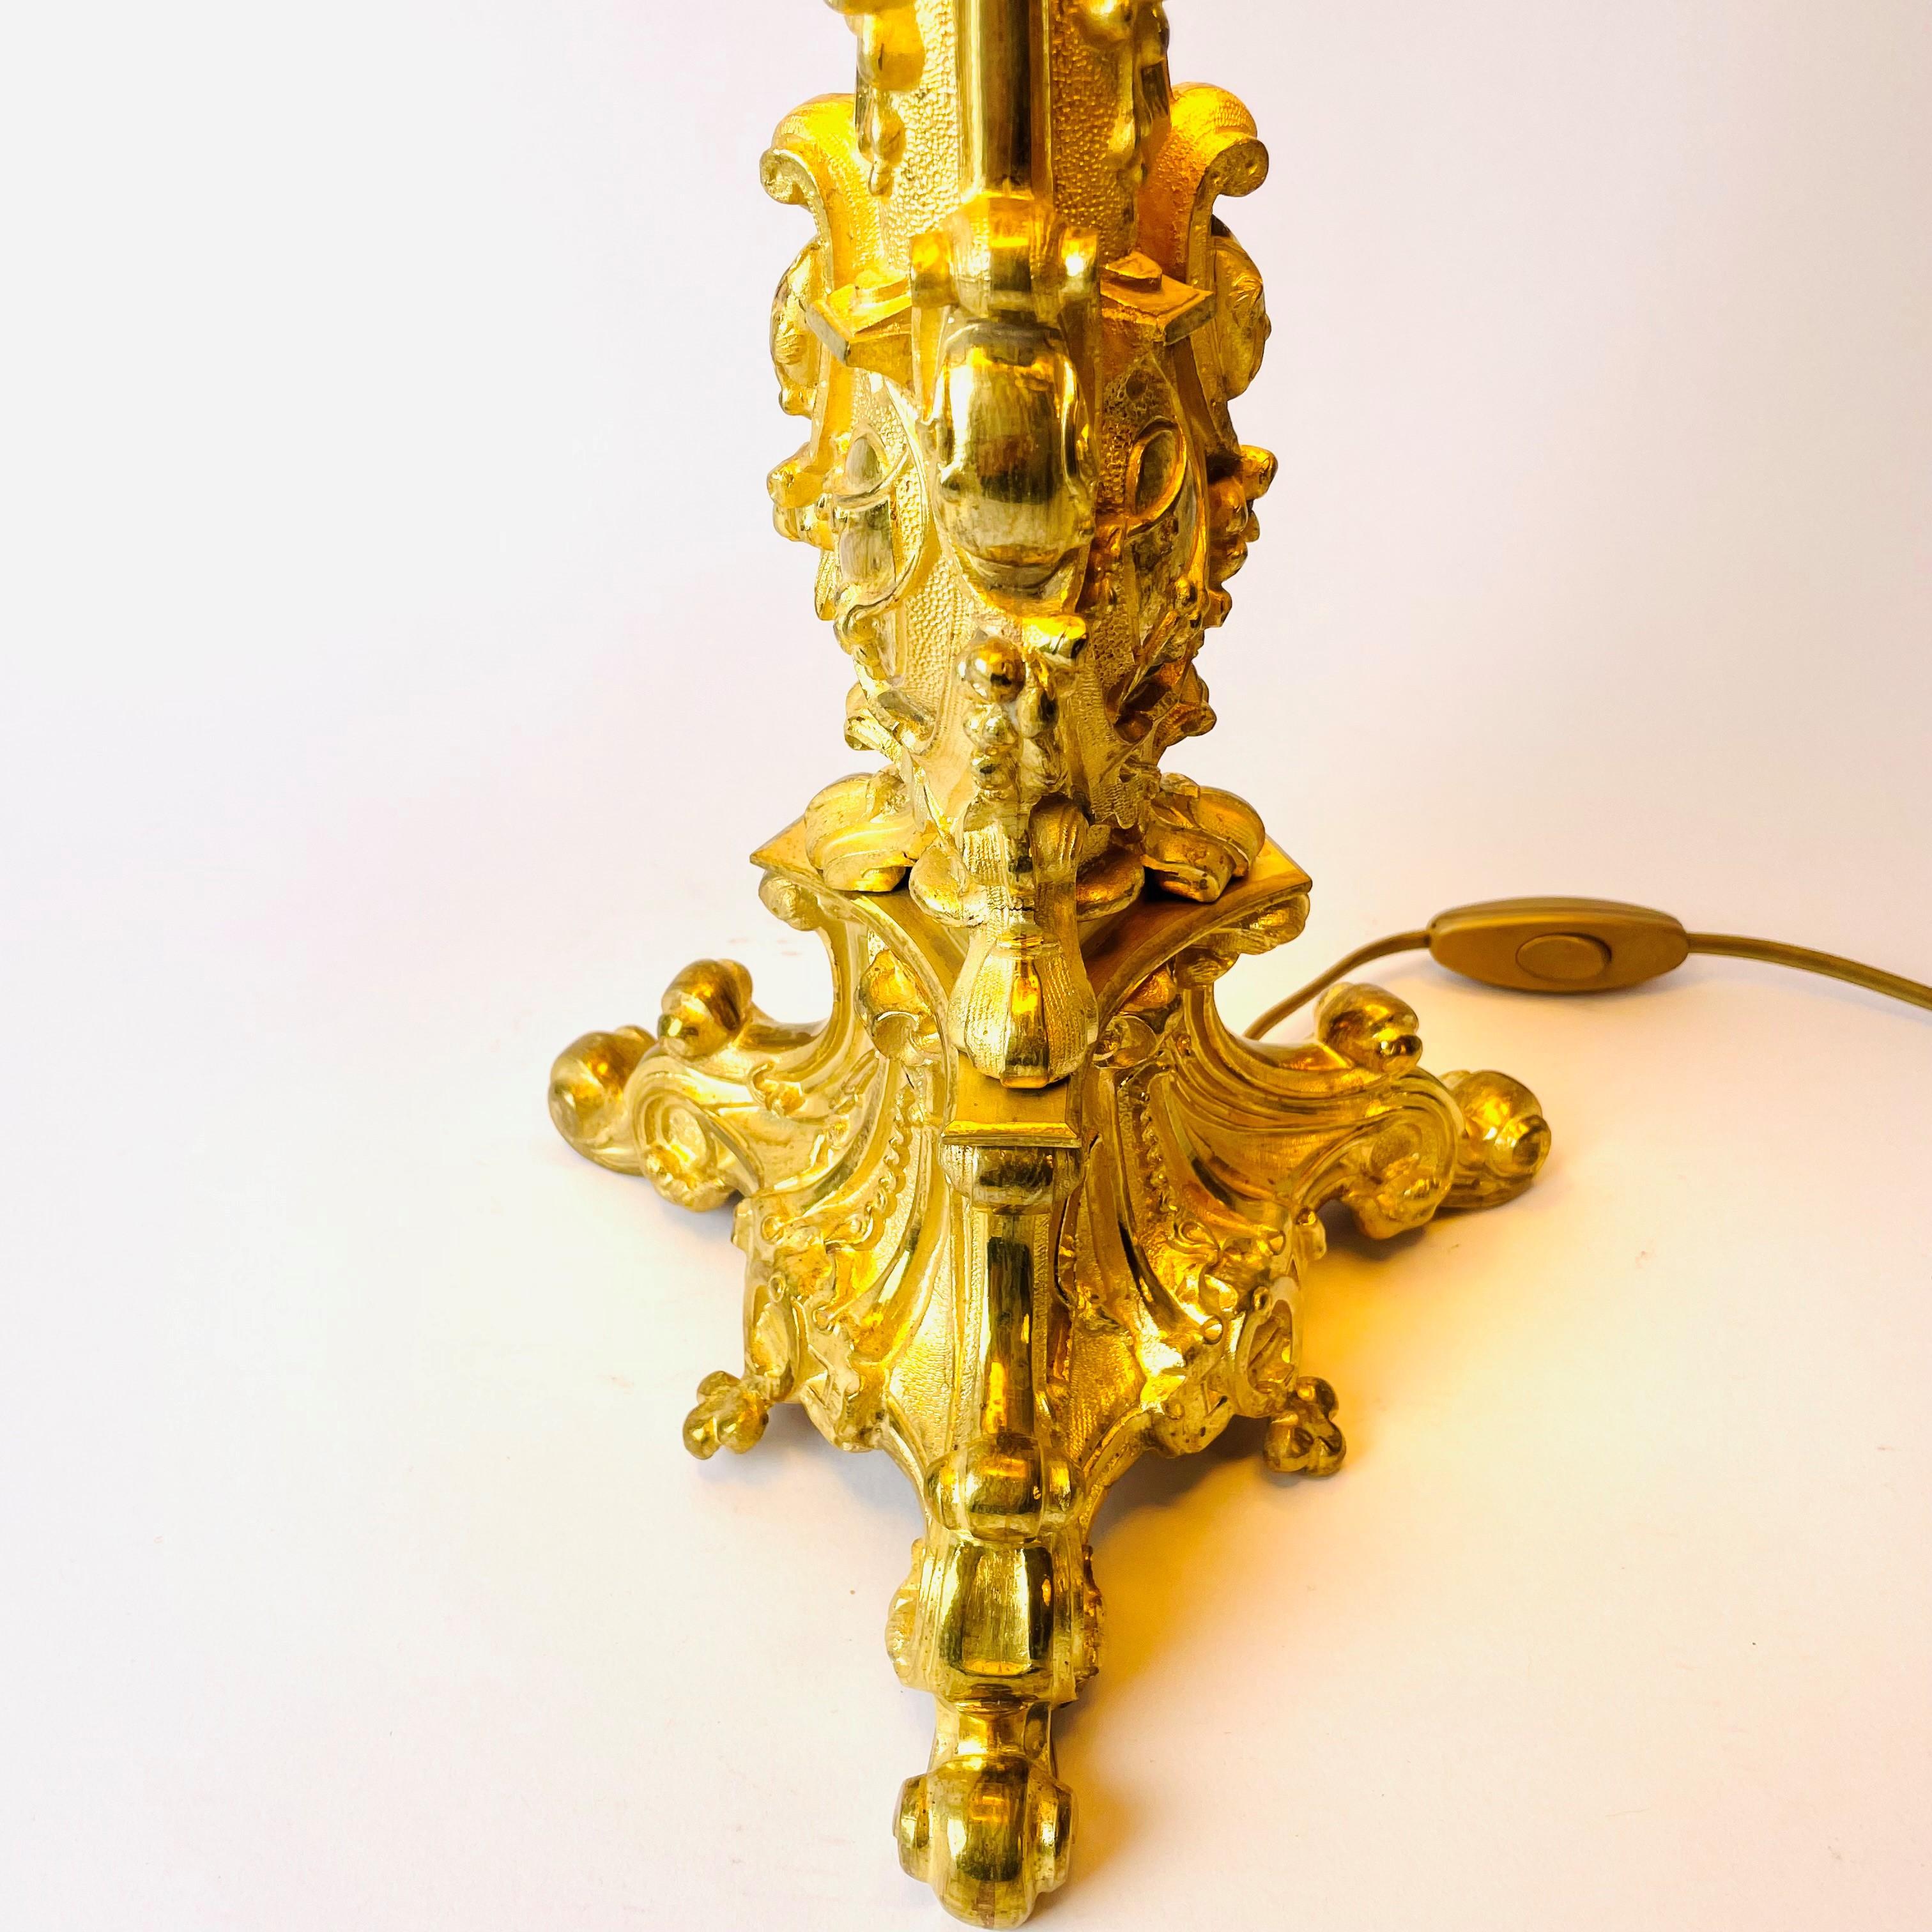 European Large Rococo Revival Table Lamp in Gilded Bronze, Mid-19th Century For Sale